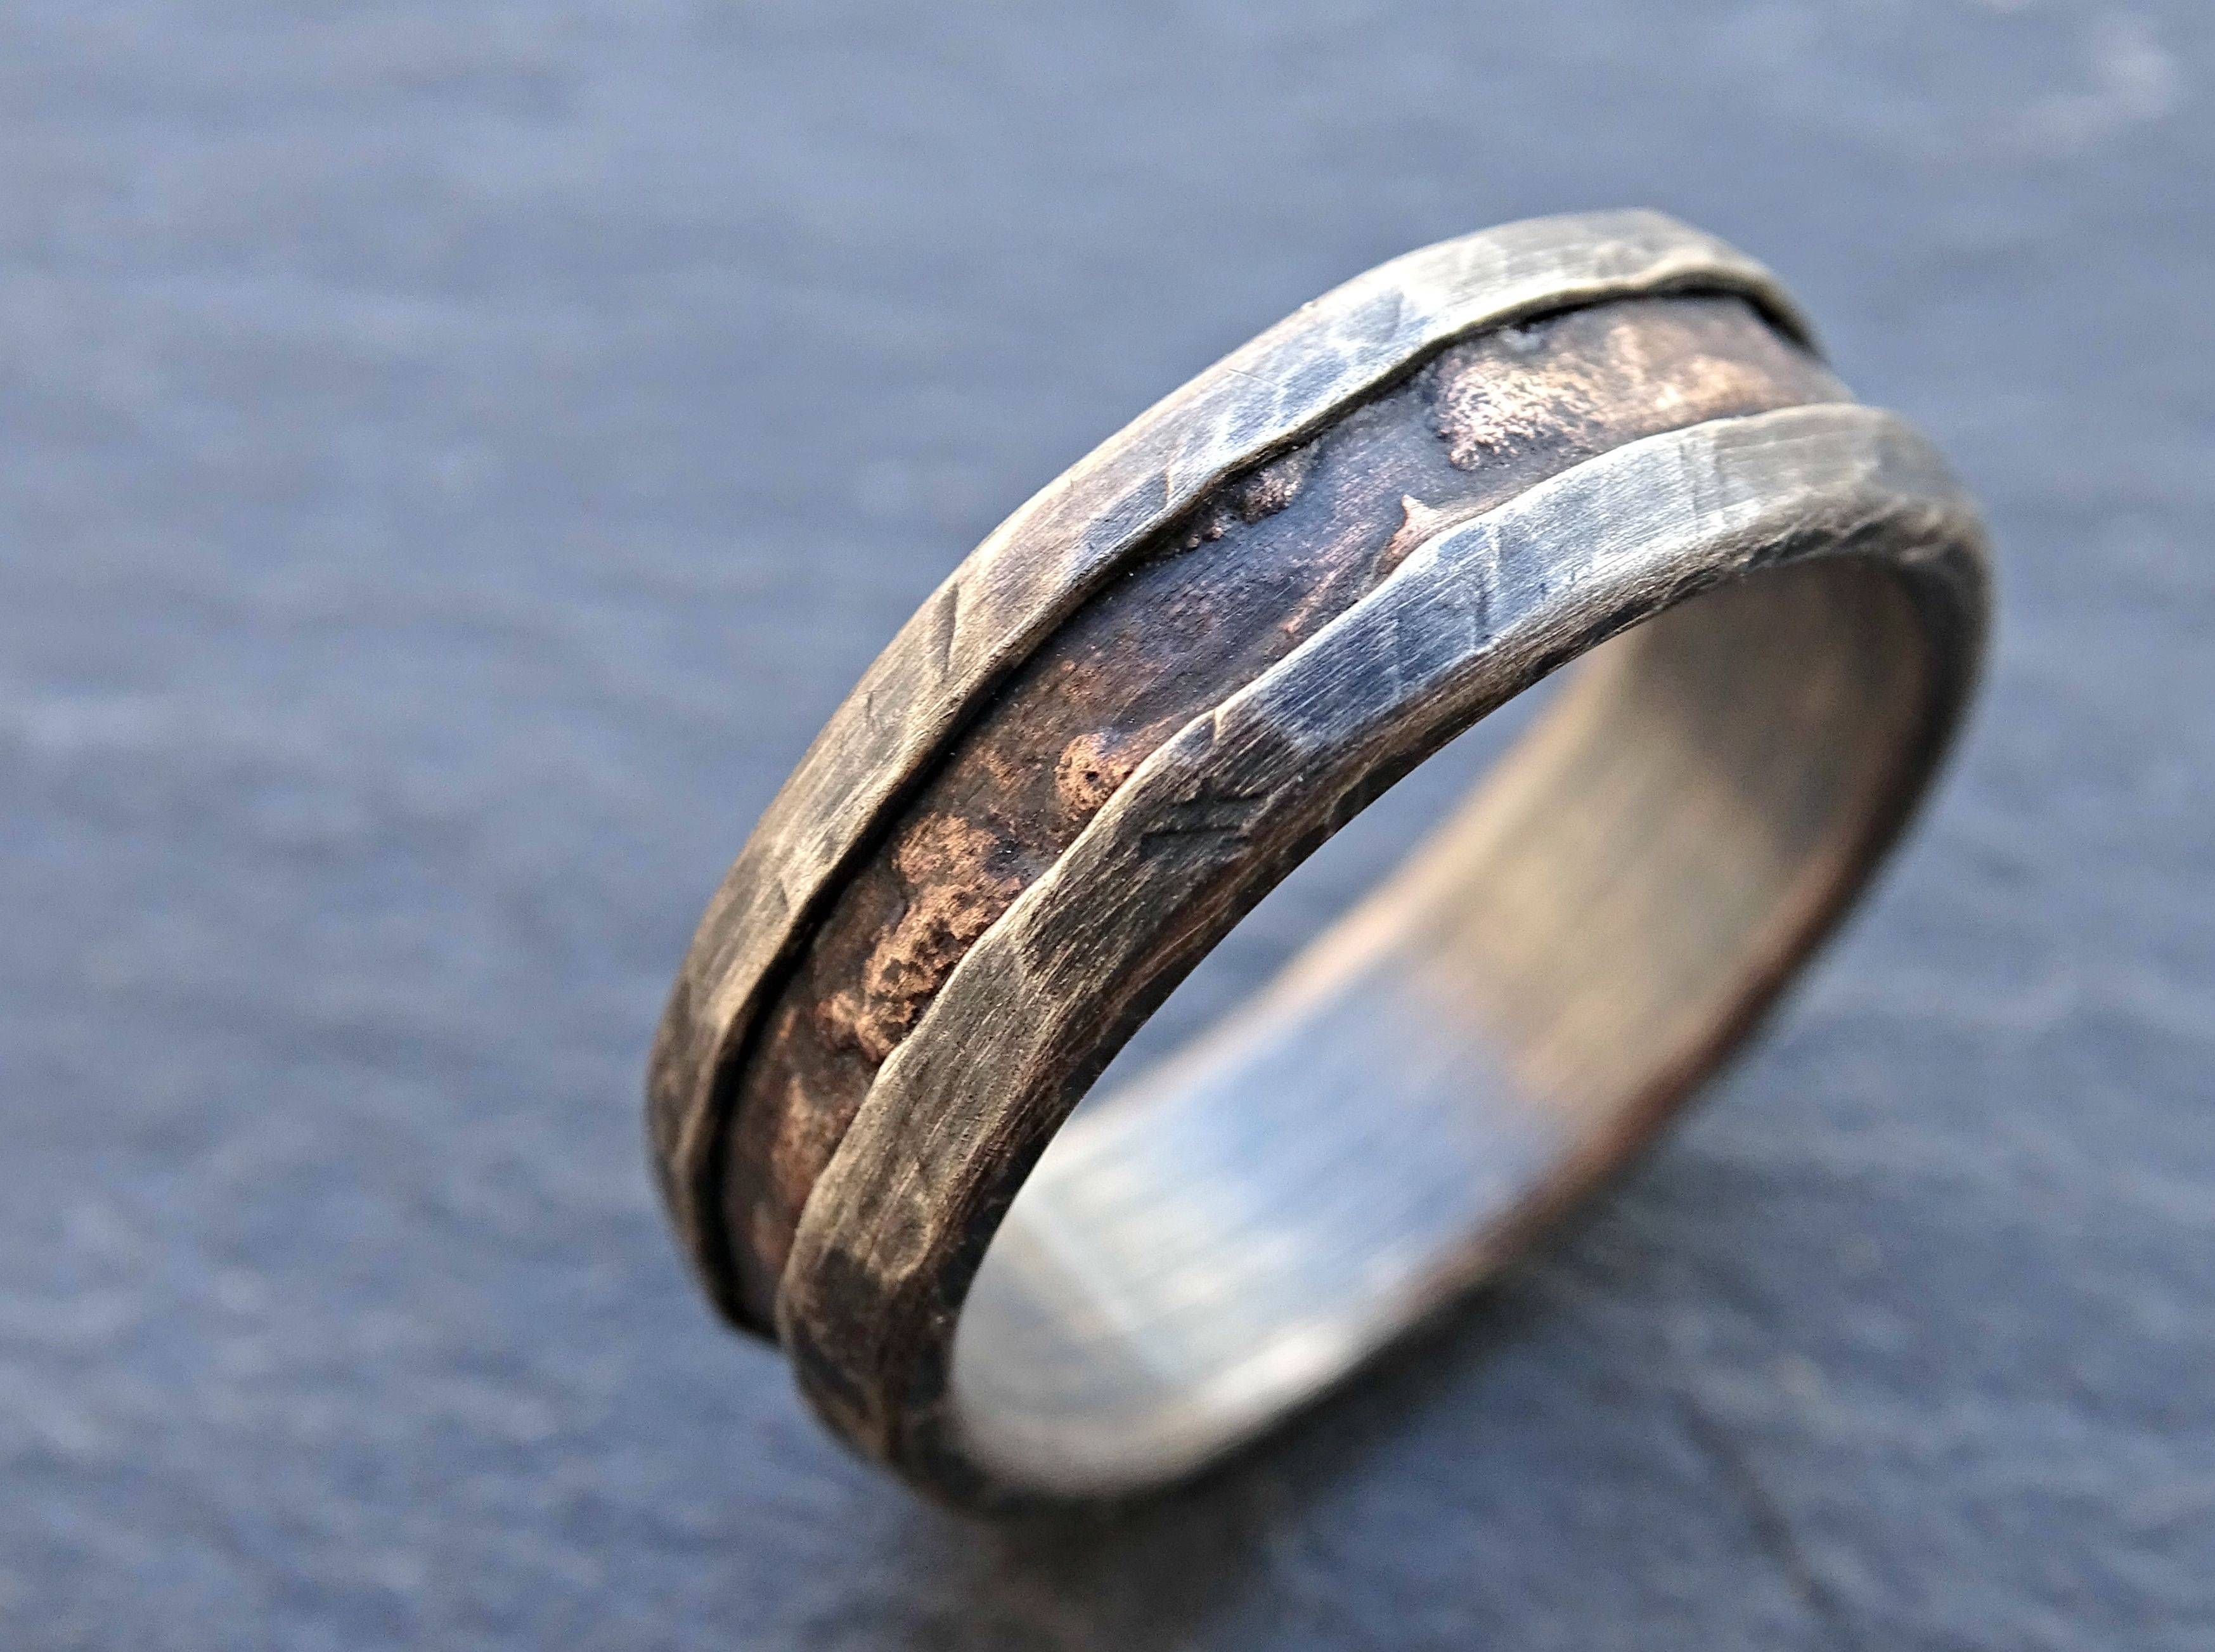 Buy A Hand Made Cool Mens Ring, Alternative Wedding Band Rugged Pertaining To Cool Mens Wedding Bands (View 6 of 15)